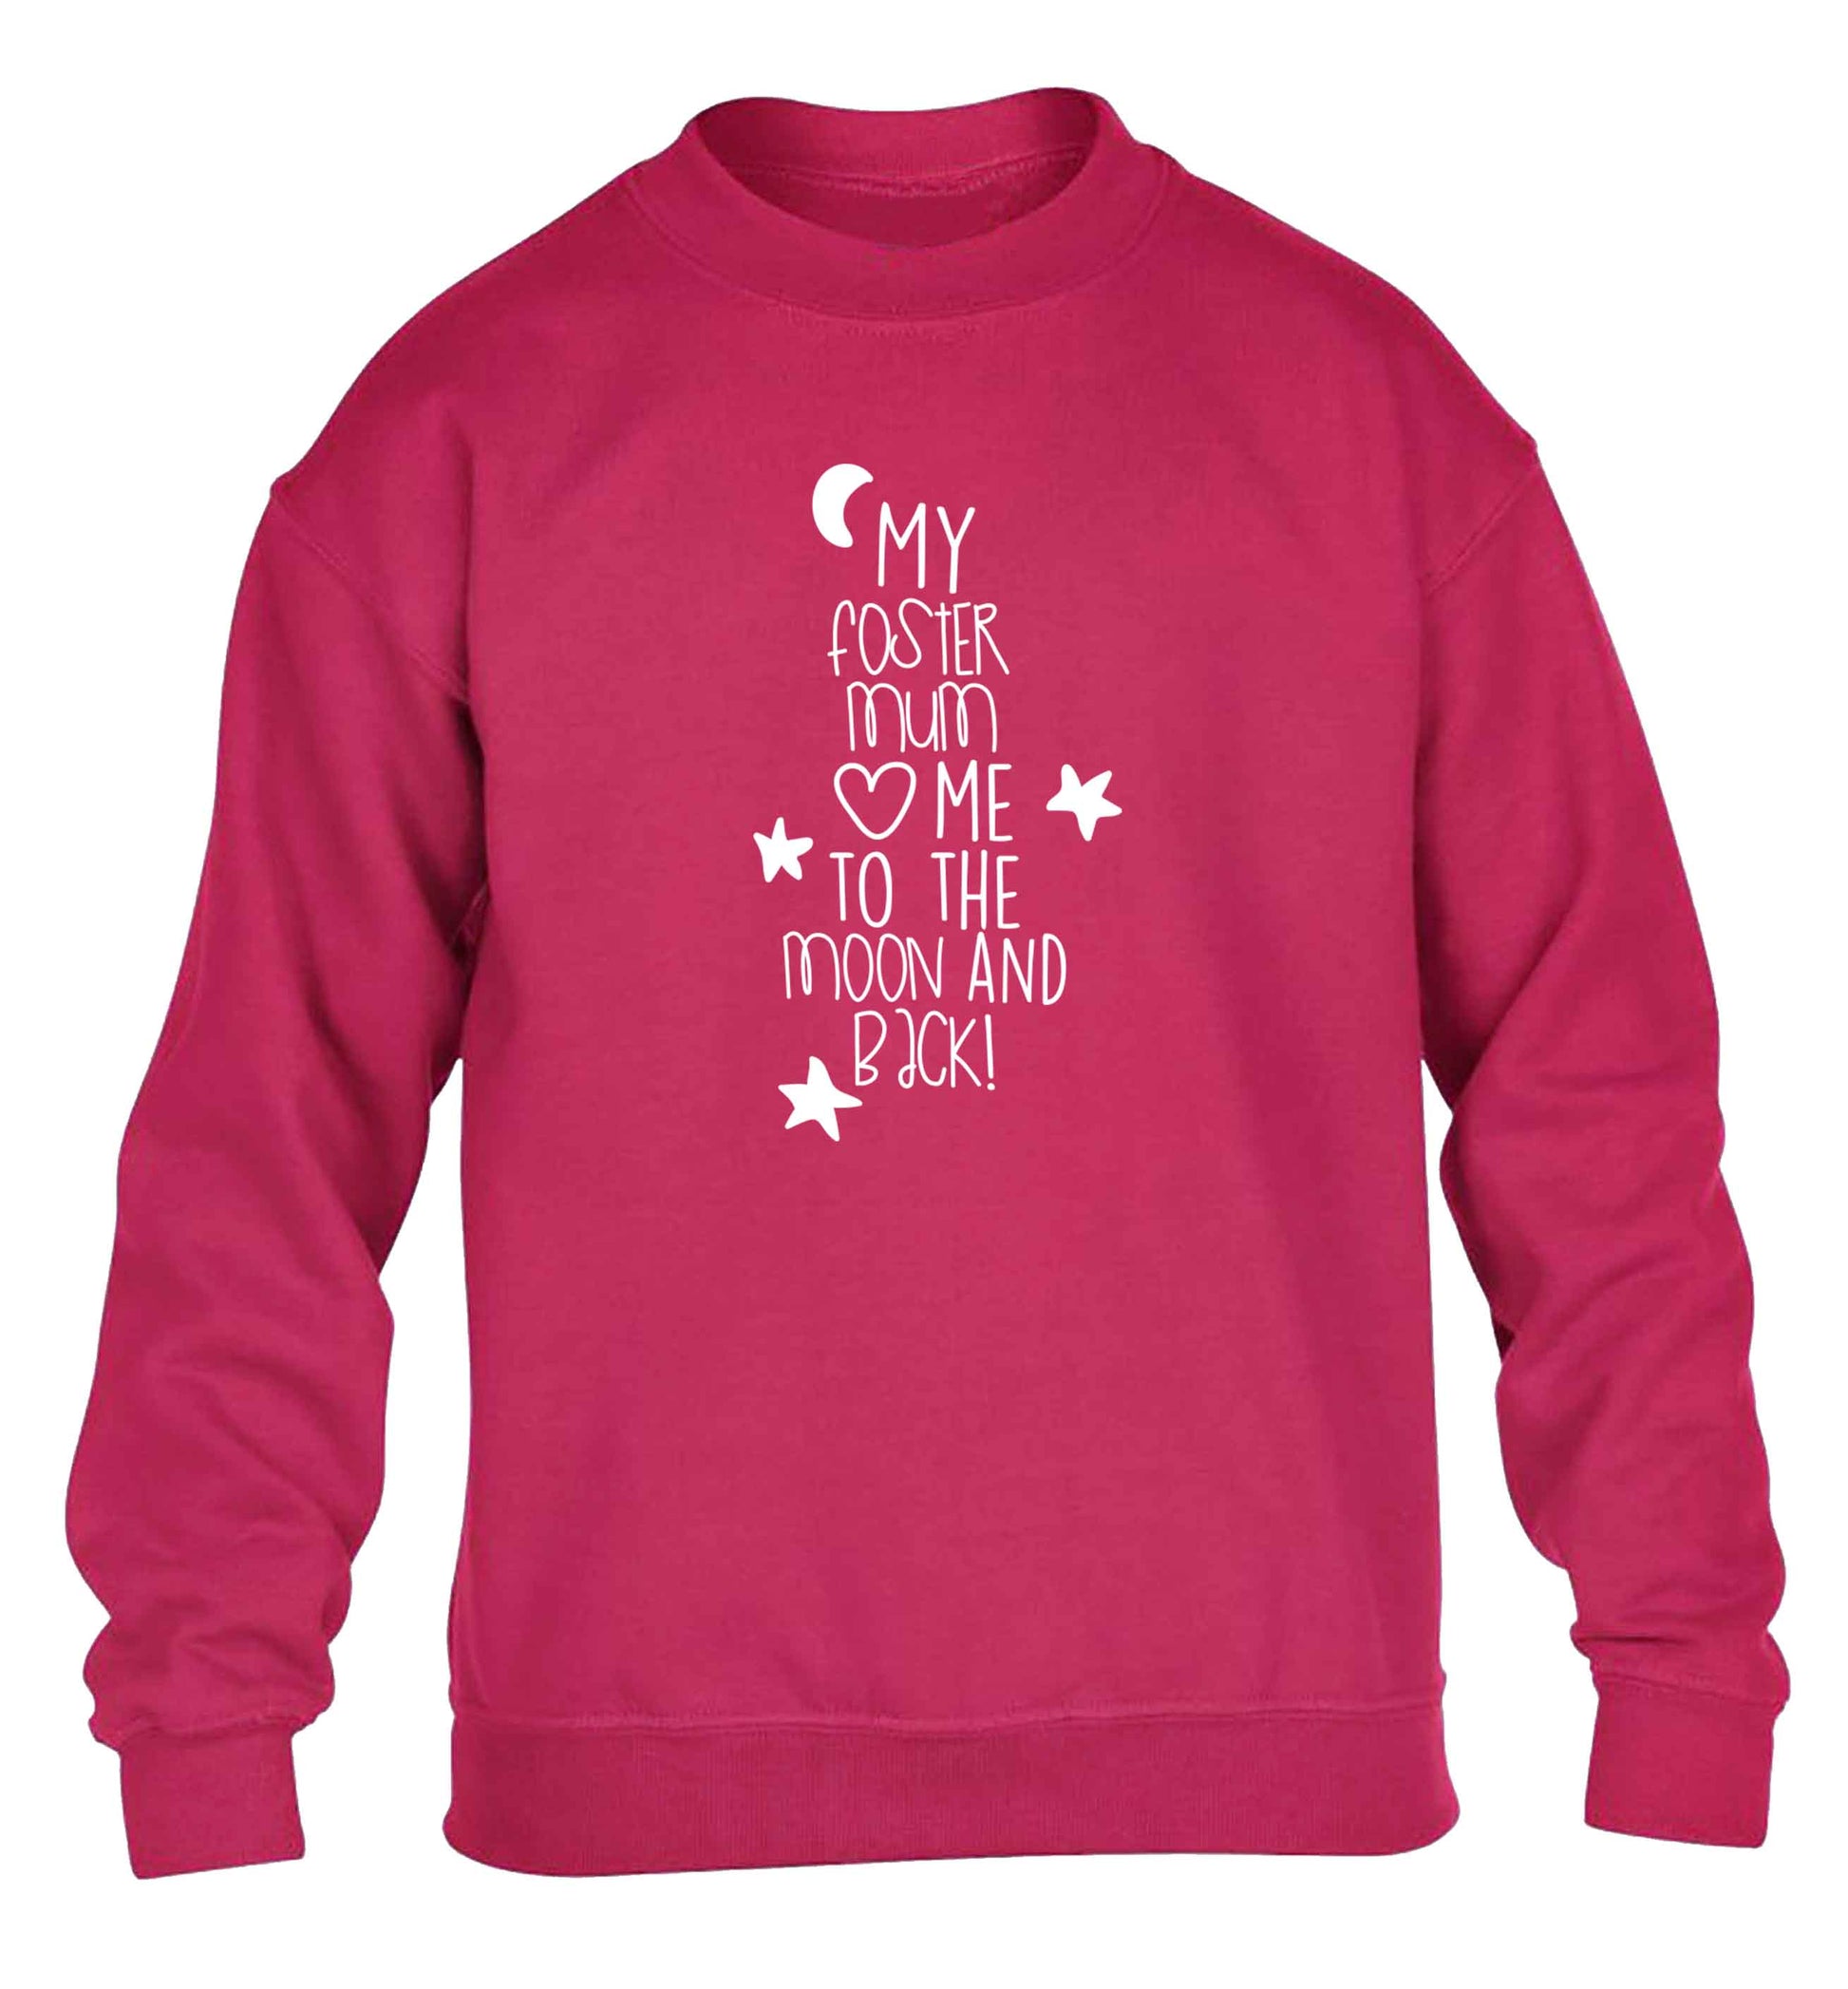 My foster mum loves me to the moon and back children's pink sweater 12-13 Years